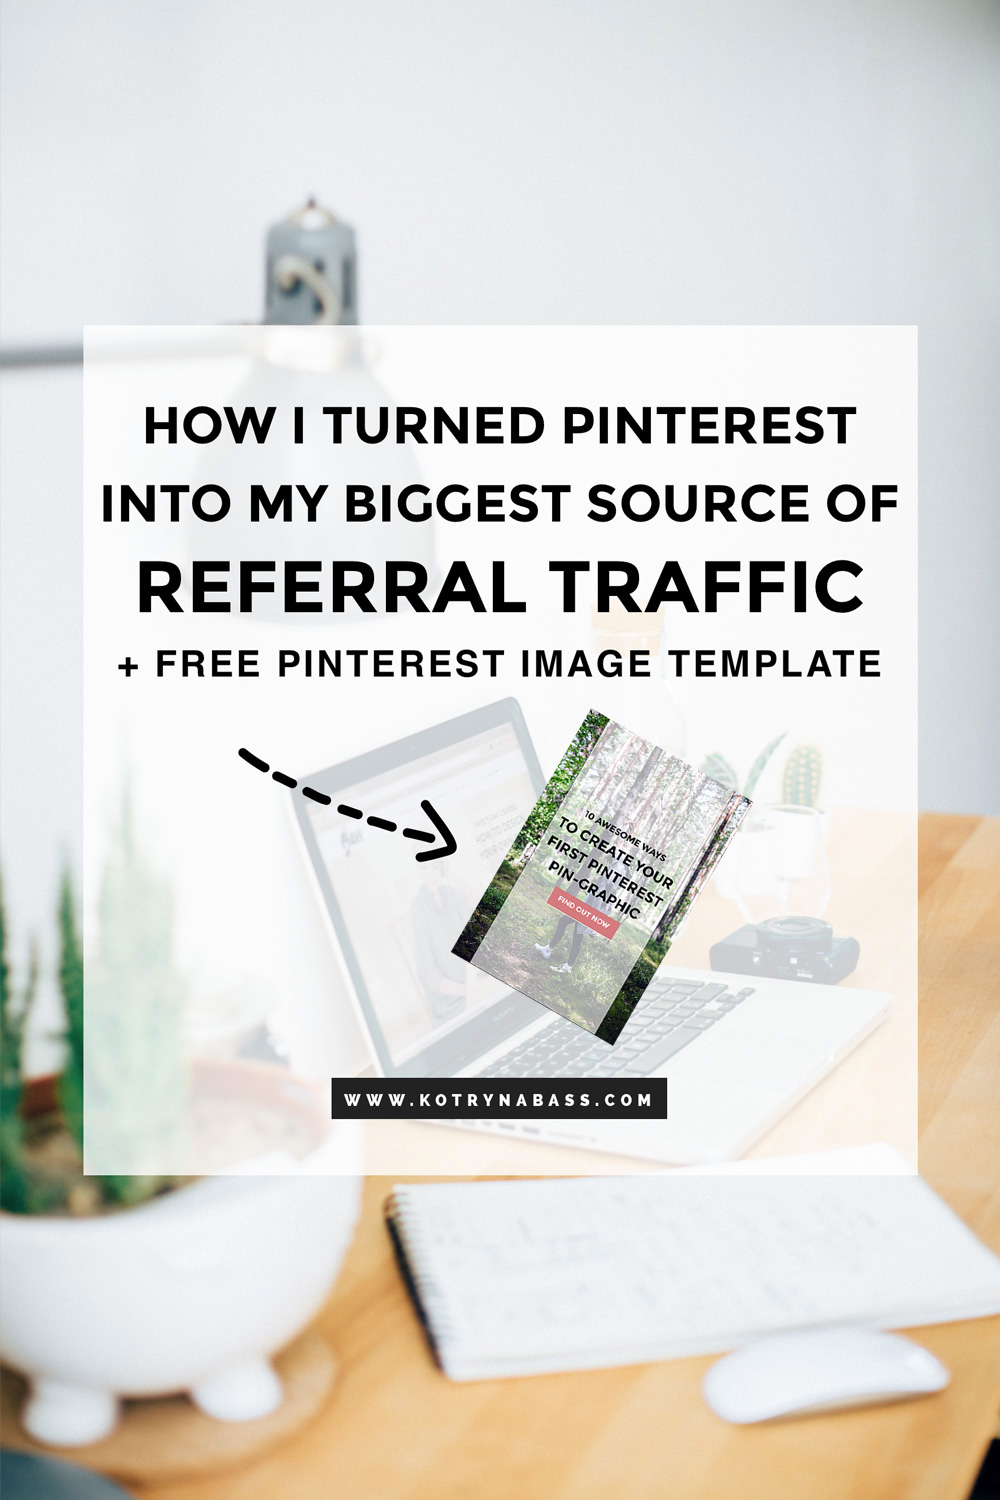 As of the beginning of 2016, my goal was to get more involved into Pinterest, and I believe I finally hacked its secrets! Pinterest is currently my No. 1 source of referral traffic. It beats all the other social media platforms I use when it comes to bringing readers and potential customers to my blog. We all should find our own ways to make it happen and today I wanted to share what tools and techniques worked for me and how I turned Pinterest into my biggest source of referral traffic.